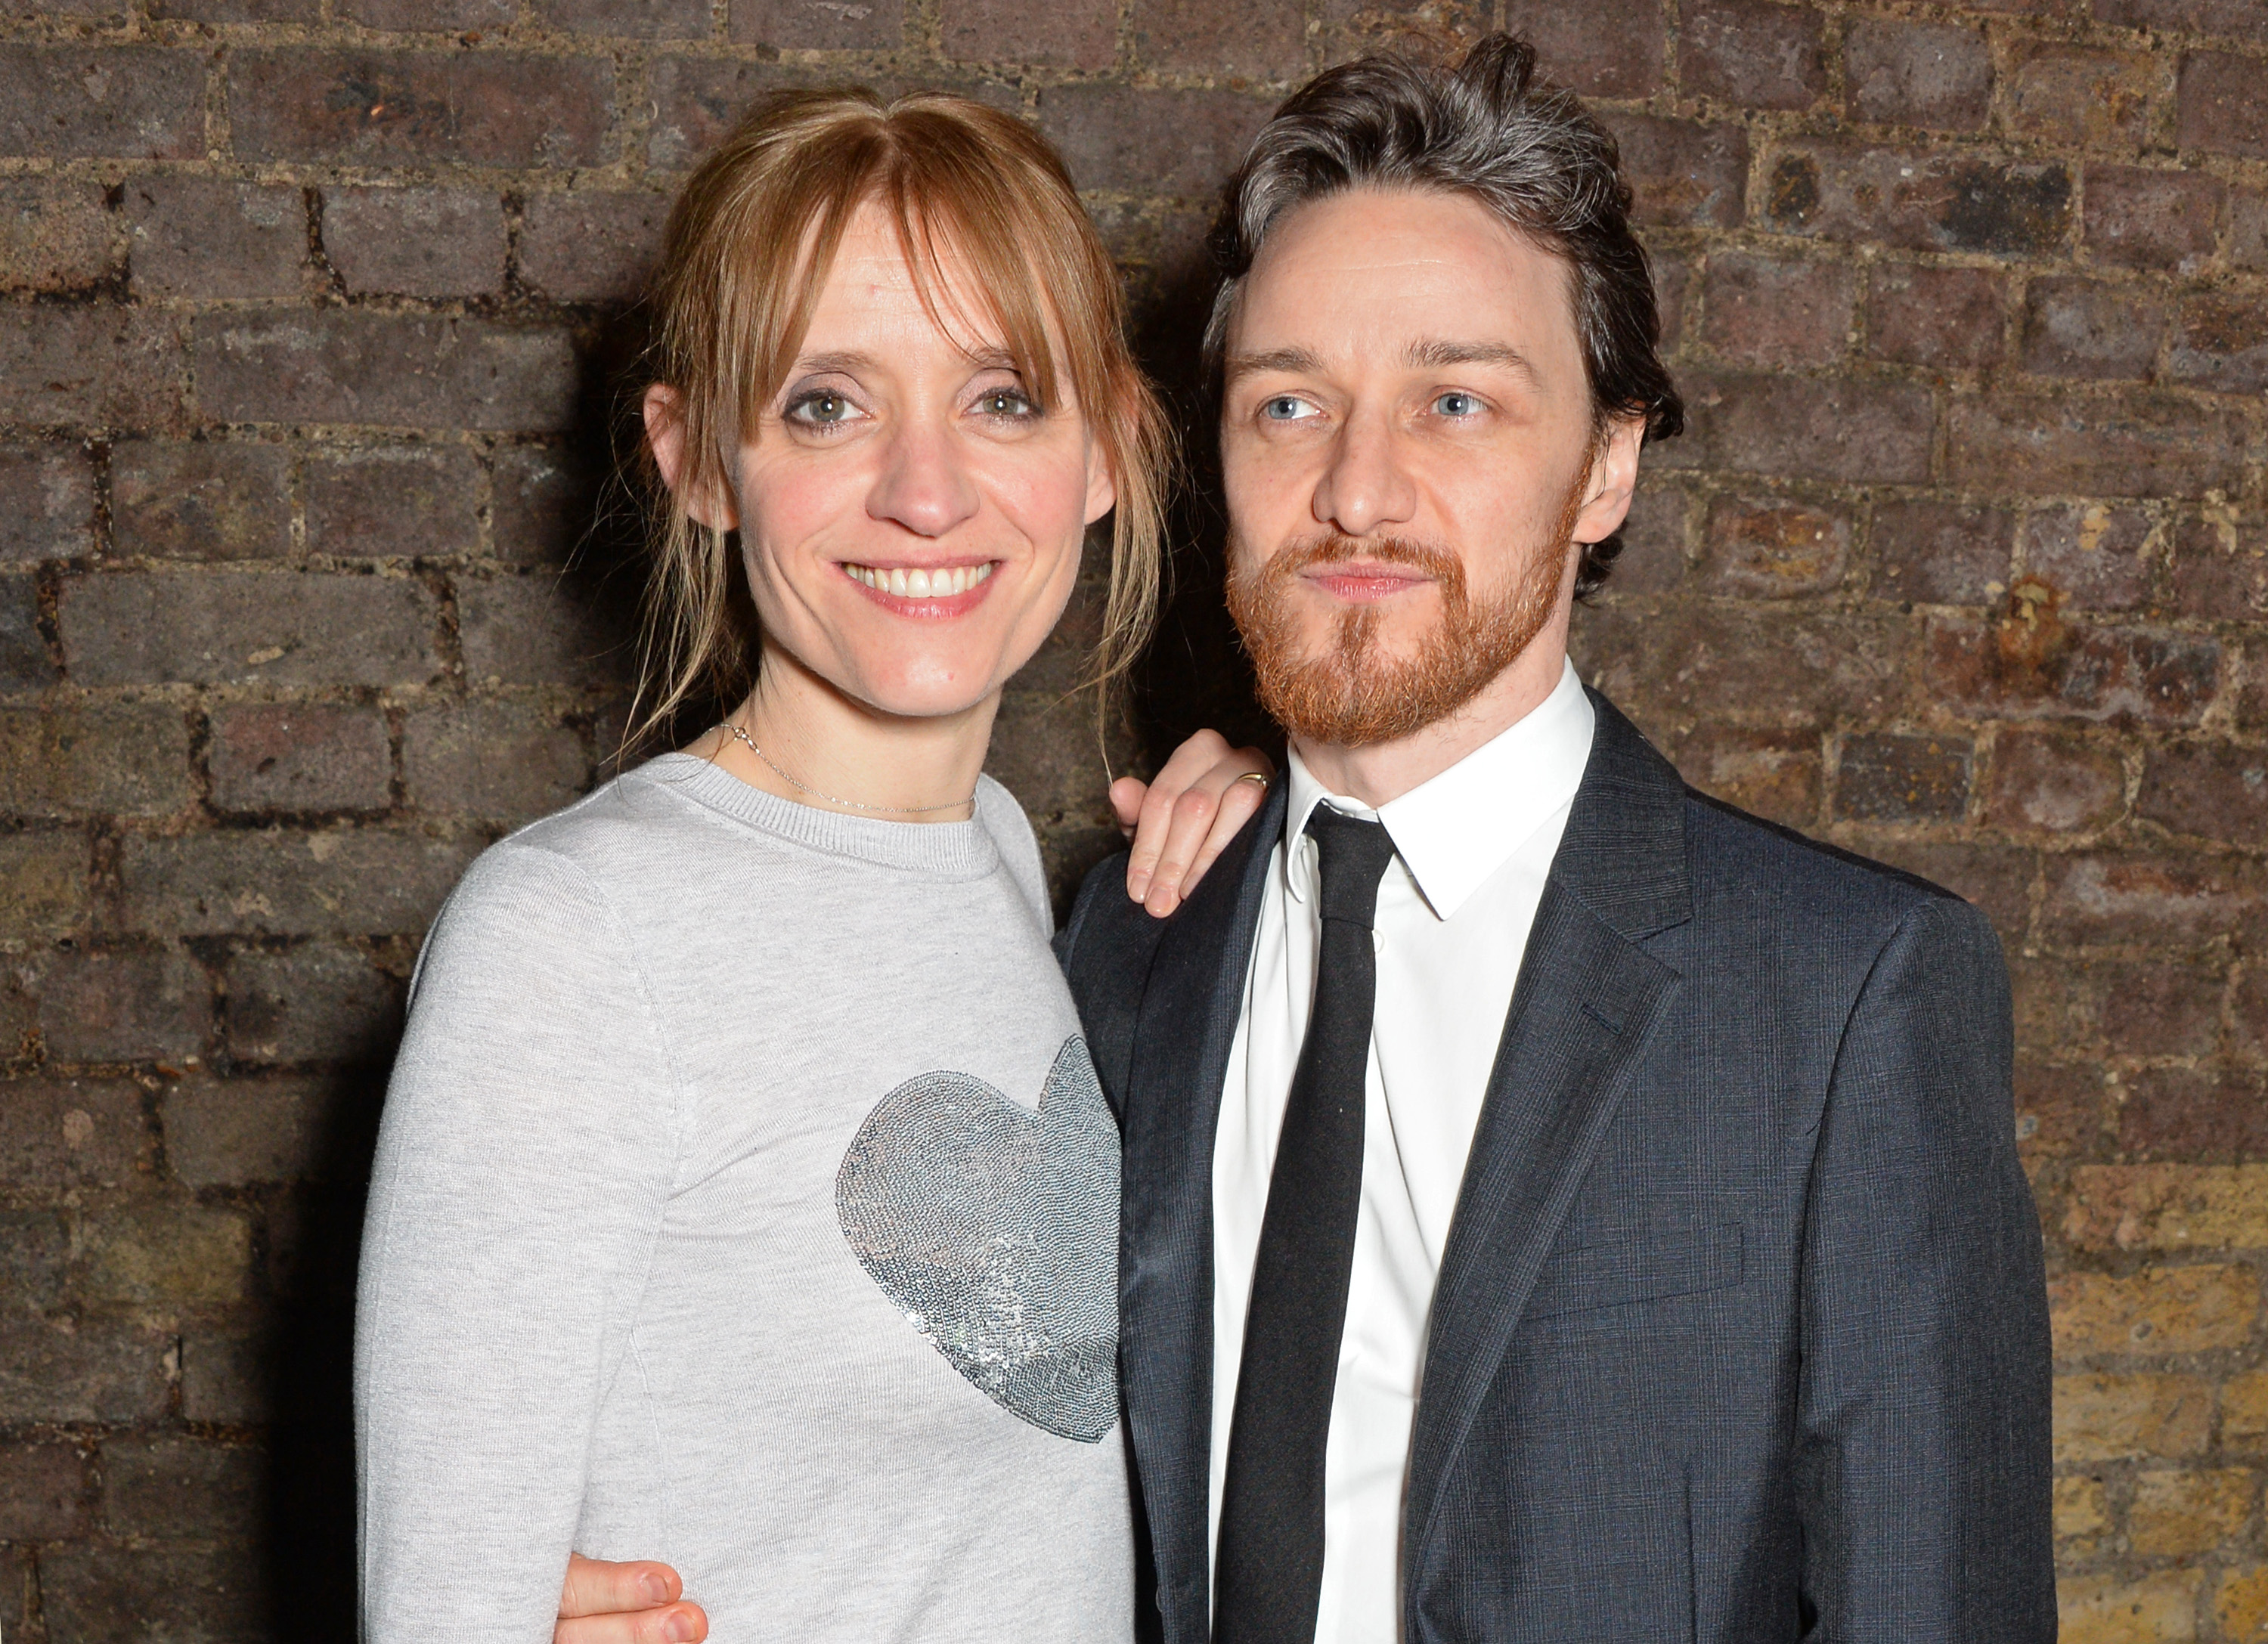 Anne-Marie Duff and James McAvoy attend an after party following the Gala Performance of "The Ruling Class" at The Bankside Vaults on January 28, 2015, in London, England. | Source: Getty Images